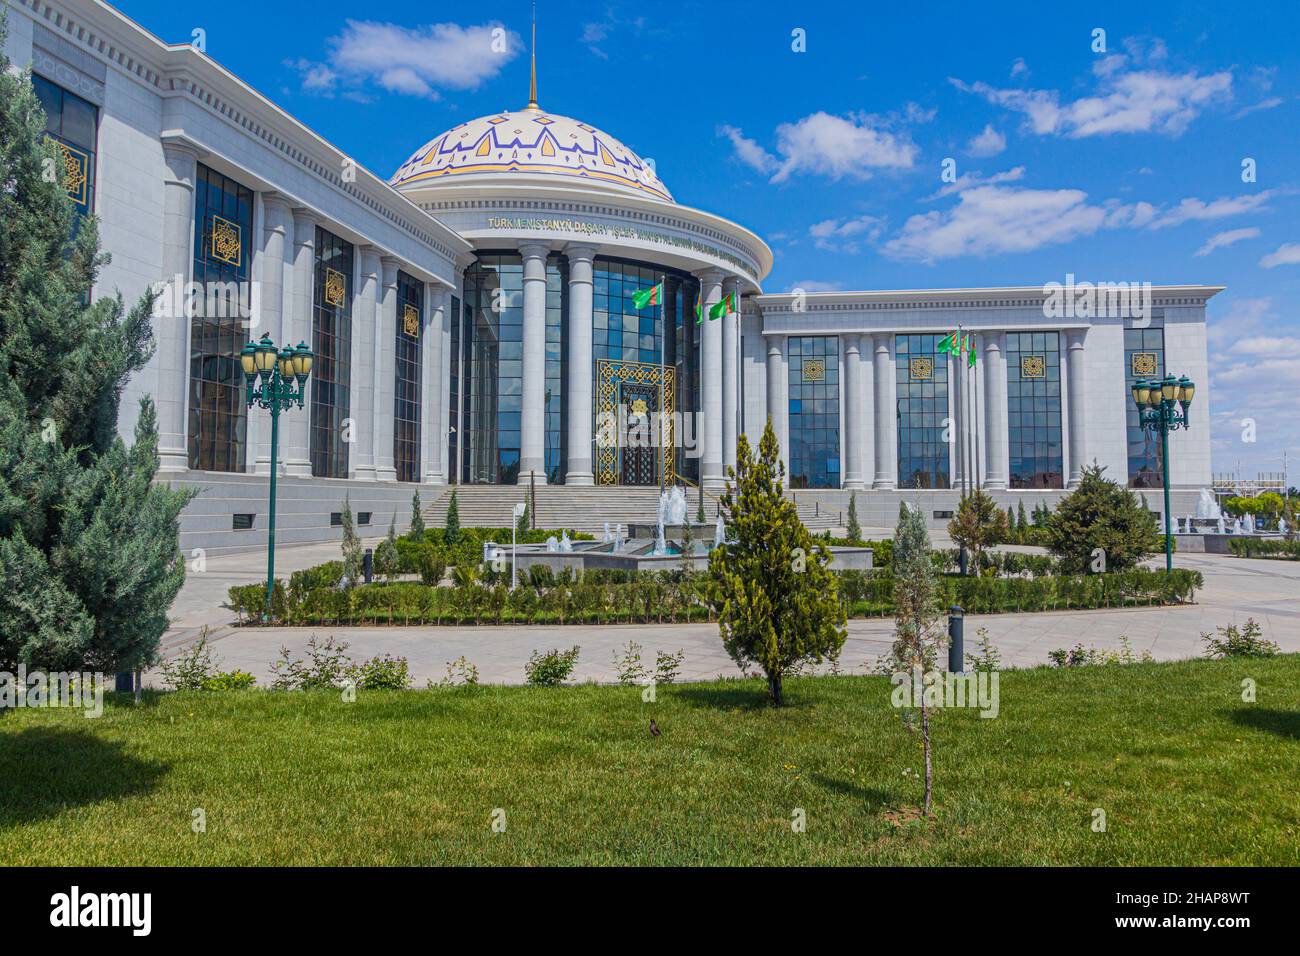 ASHGABAT, TURKMENISTAN - APRIL 18, 2018: Institute of International Relations of the Ministry of Foreign Affairs of Turkmenistan in Ashgabat, capital Stock Photo